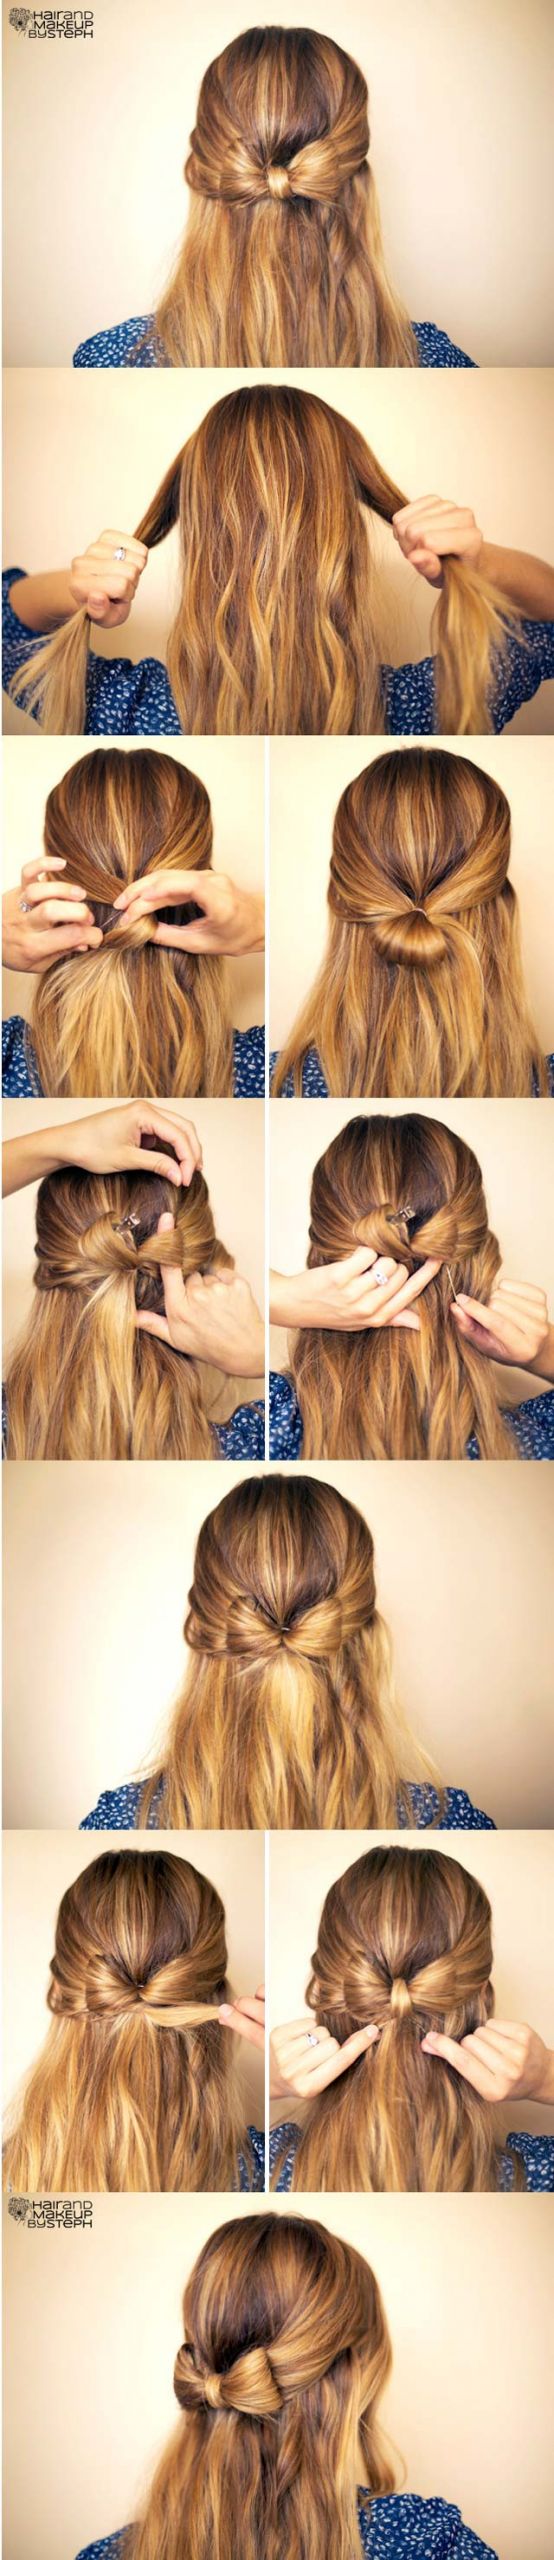 Easy Hairstyle Steps
 Super Easy Step by Step Hairstyle Ideas fashionsy